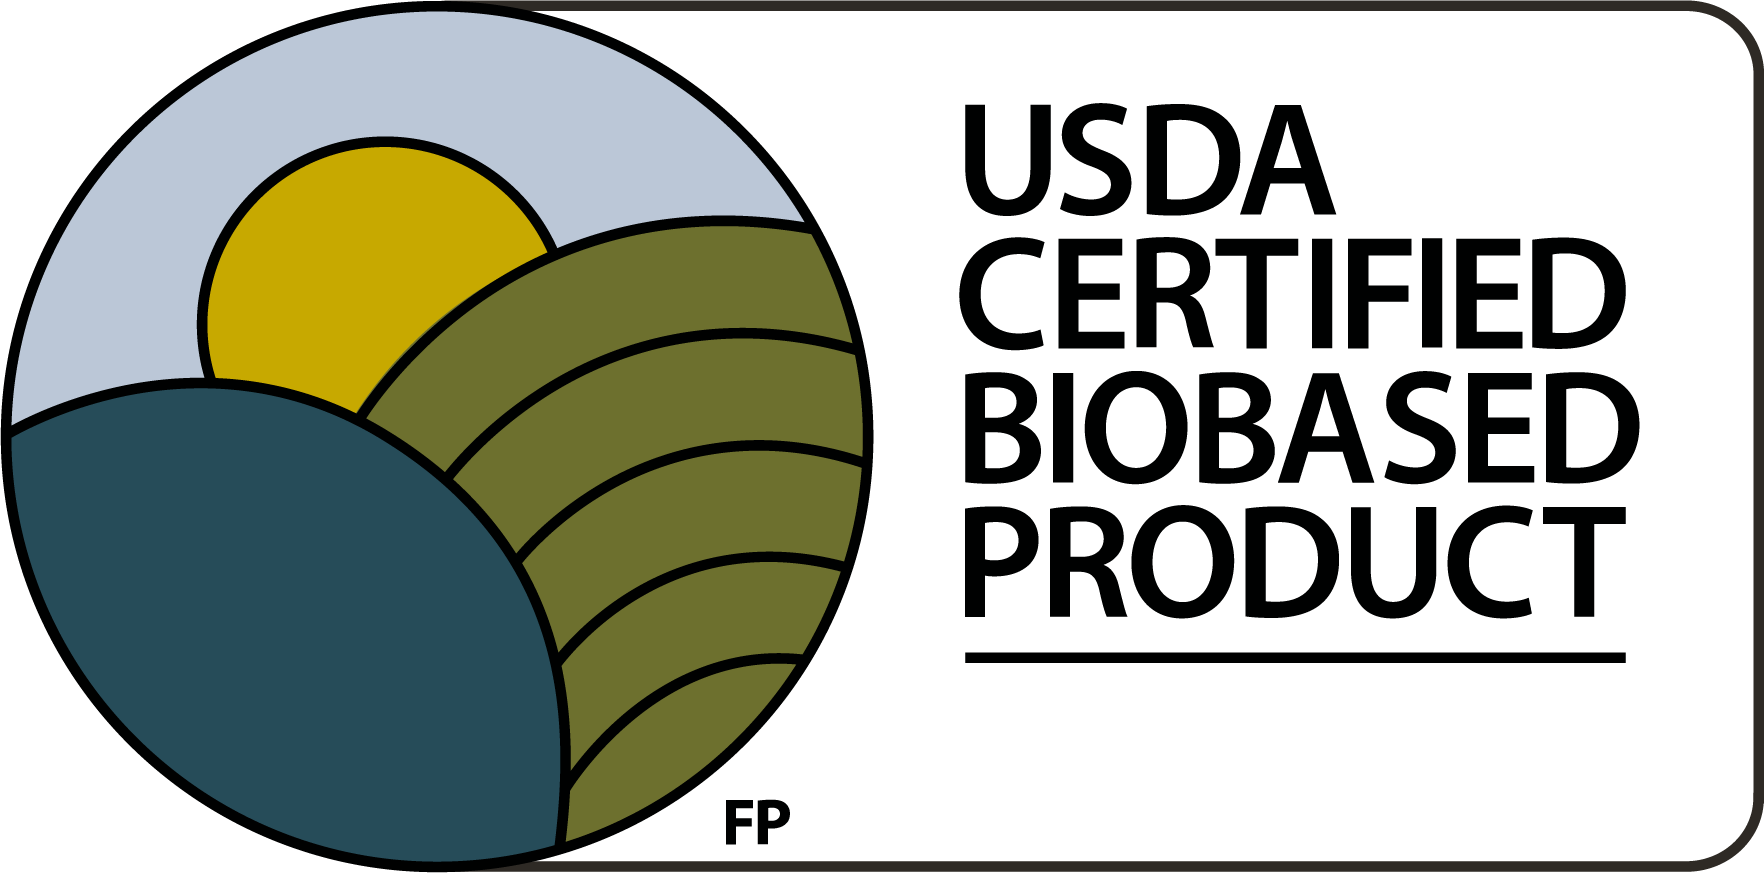 USDA Certified Biobased Product icon